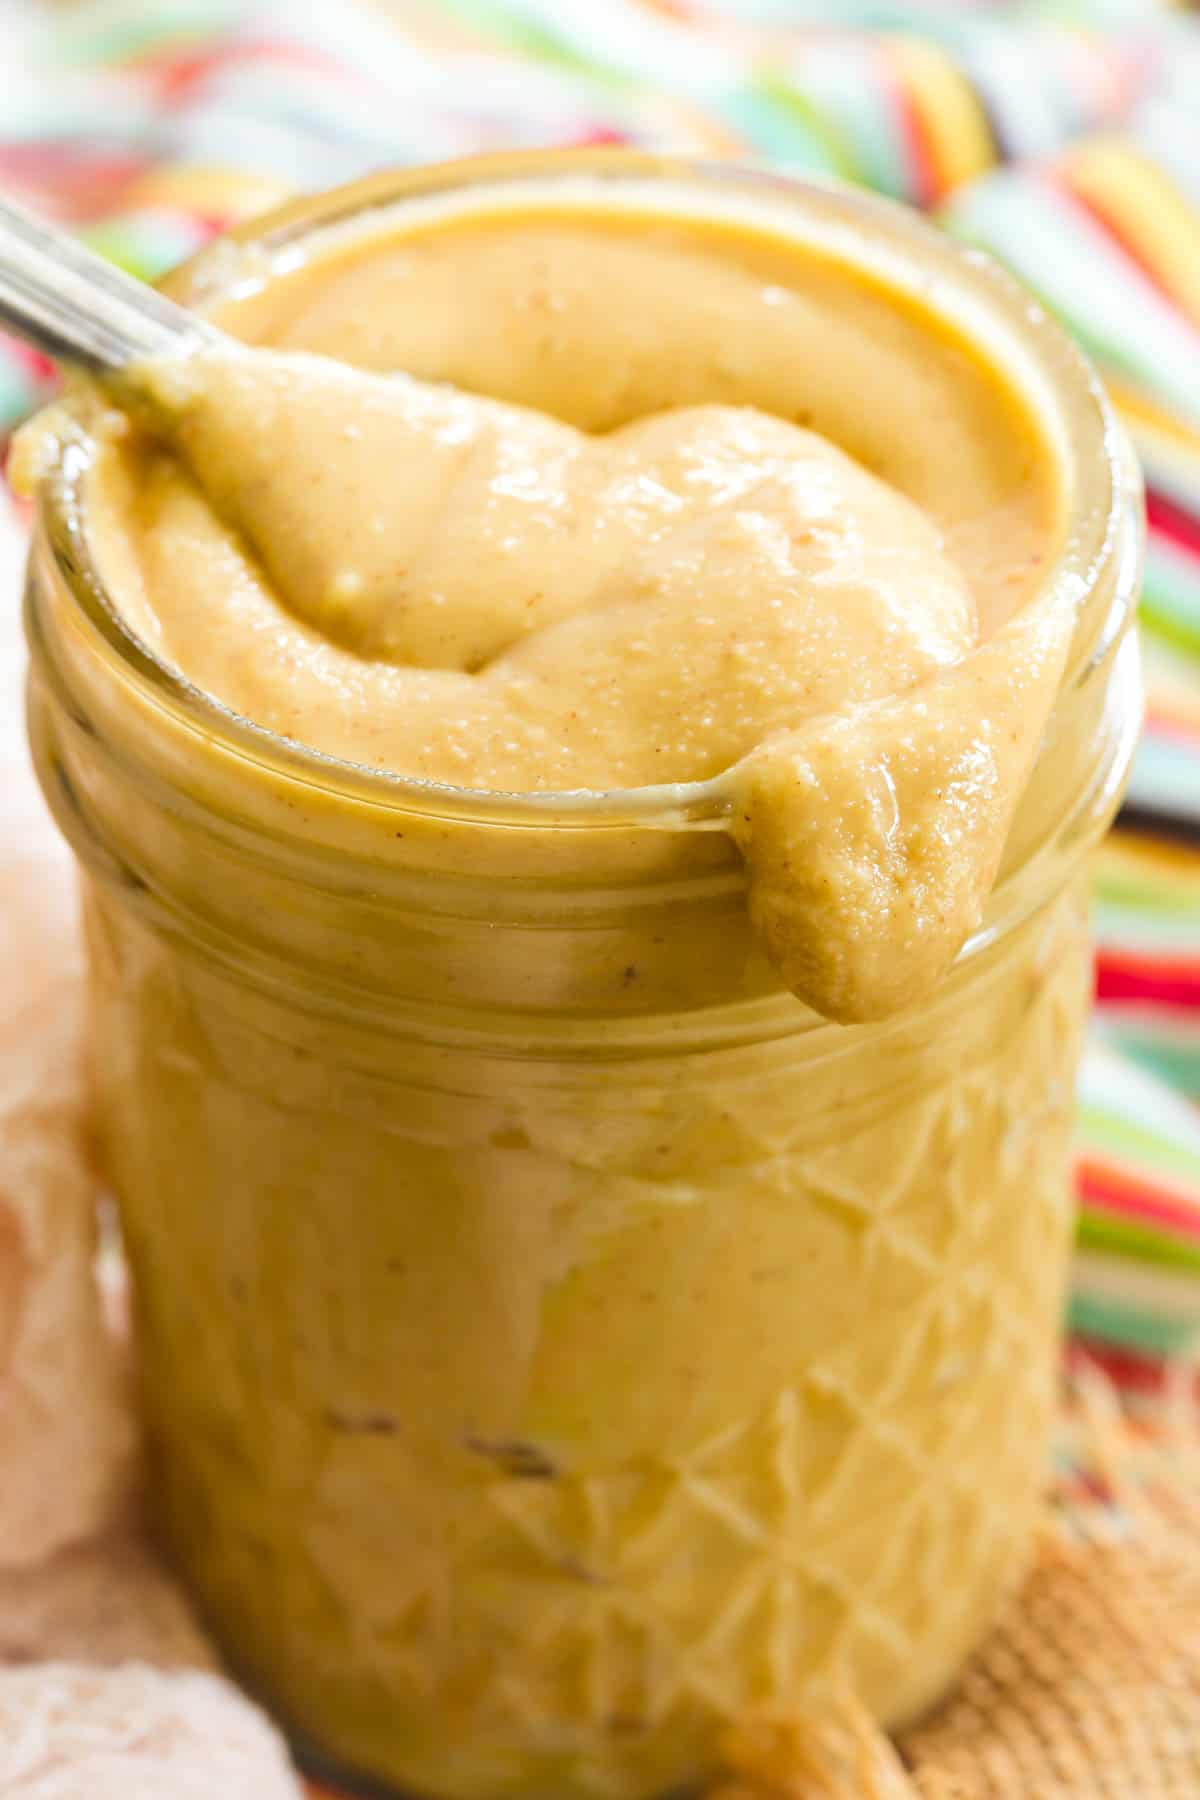 A spoon is shown dipping into a glass jar of homemade peanut butter.